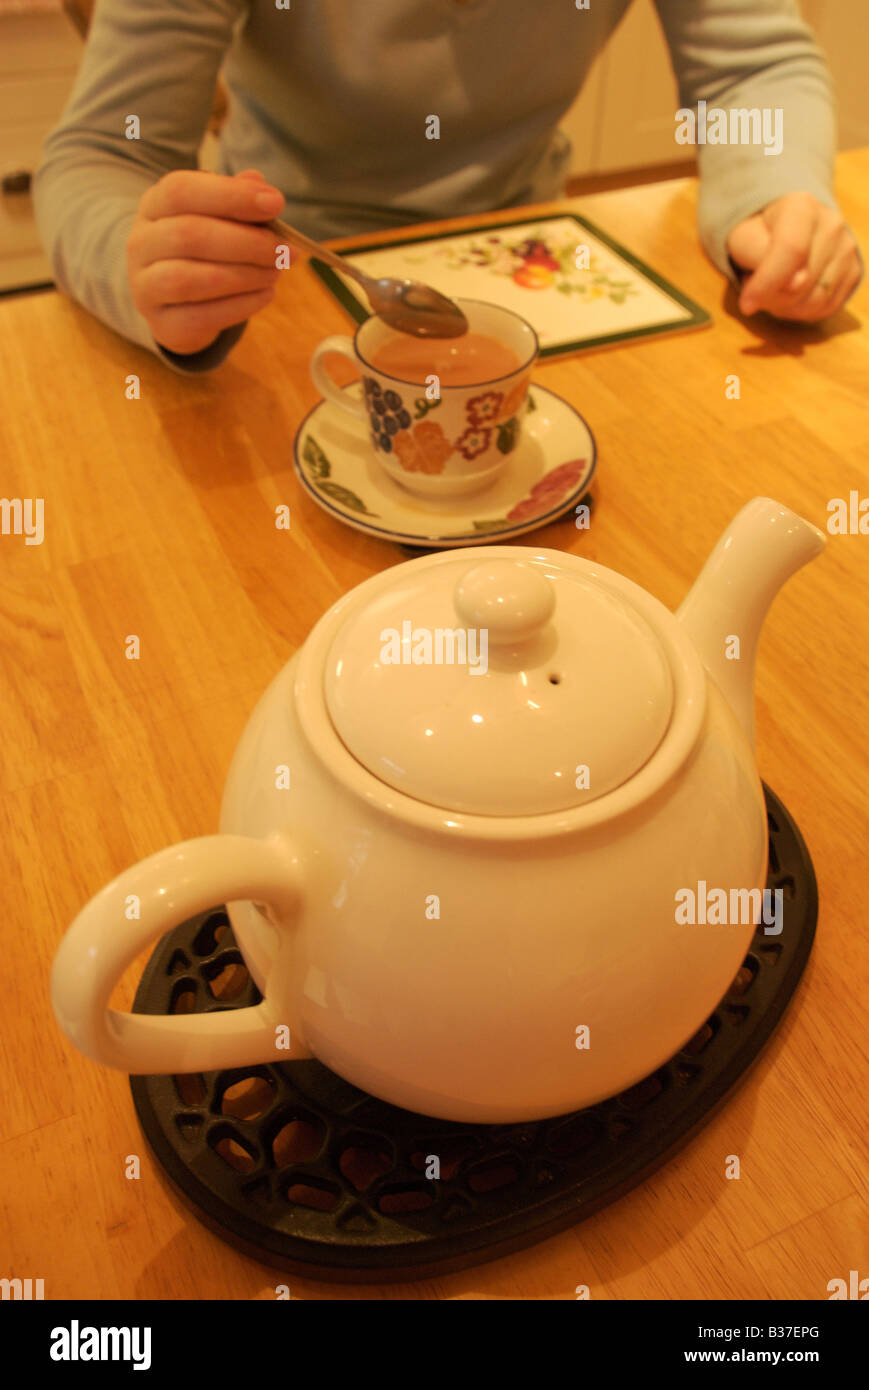 Teapot with woman stirring cup of tea at kitchen table Stock Photo